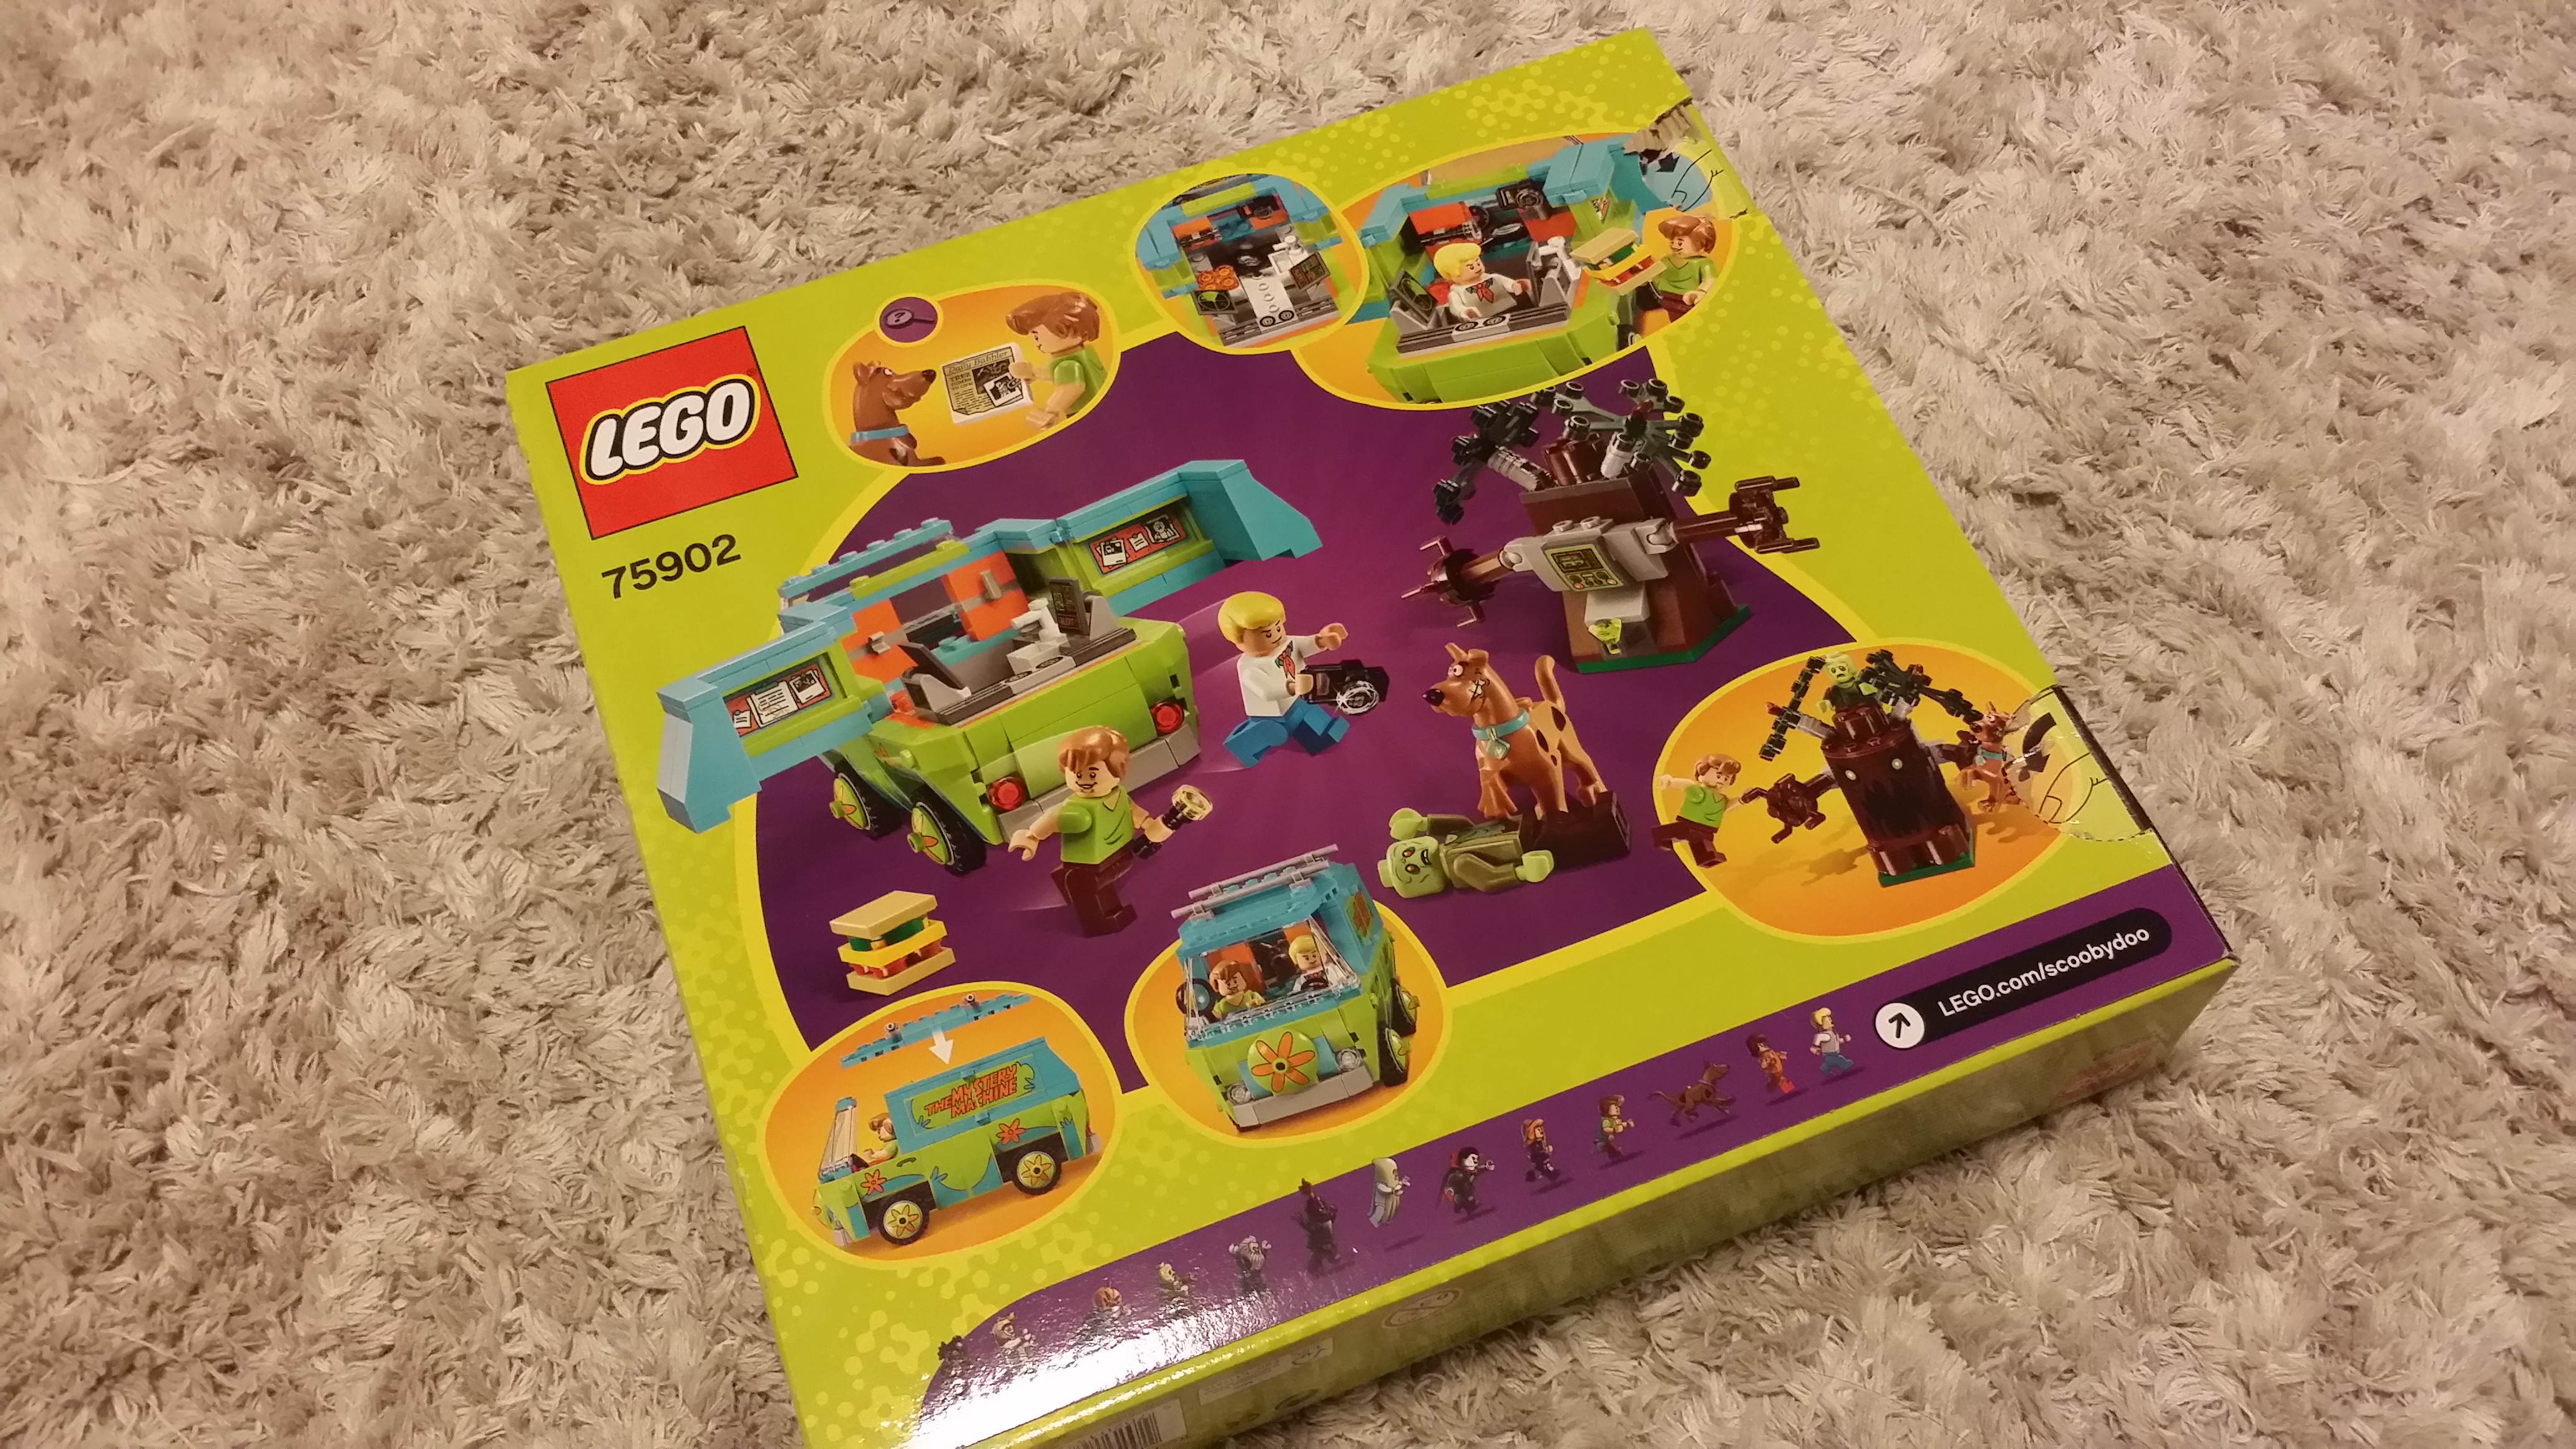 Lego Scooby Doo Mystery Machine and Mummy Mystery Museum sets